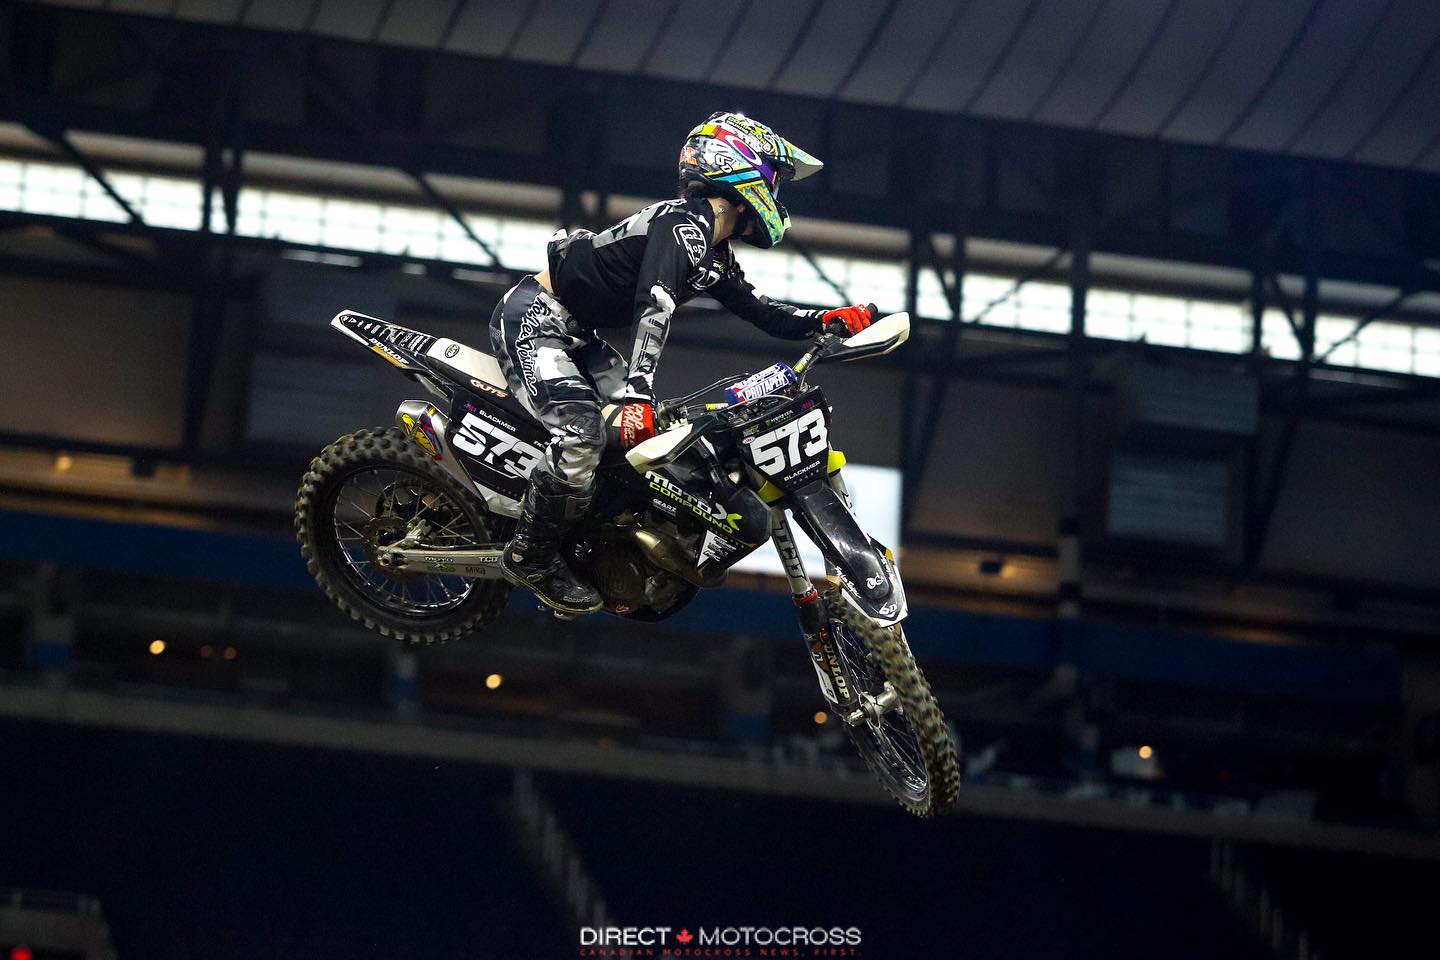 Christopher Blackmer Takes on Supercross in Front of Hometown Fans